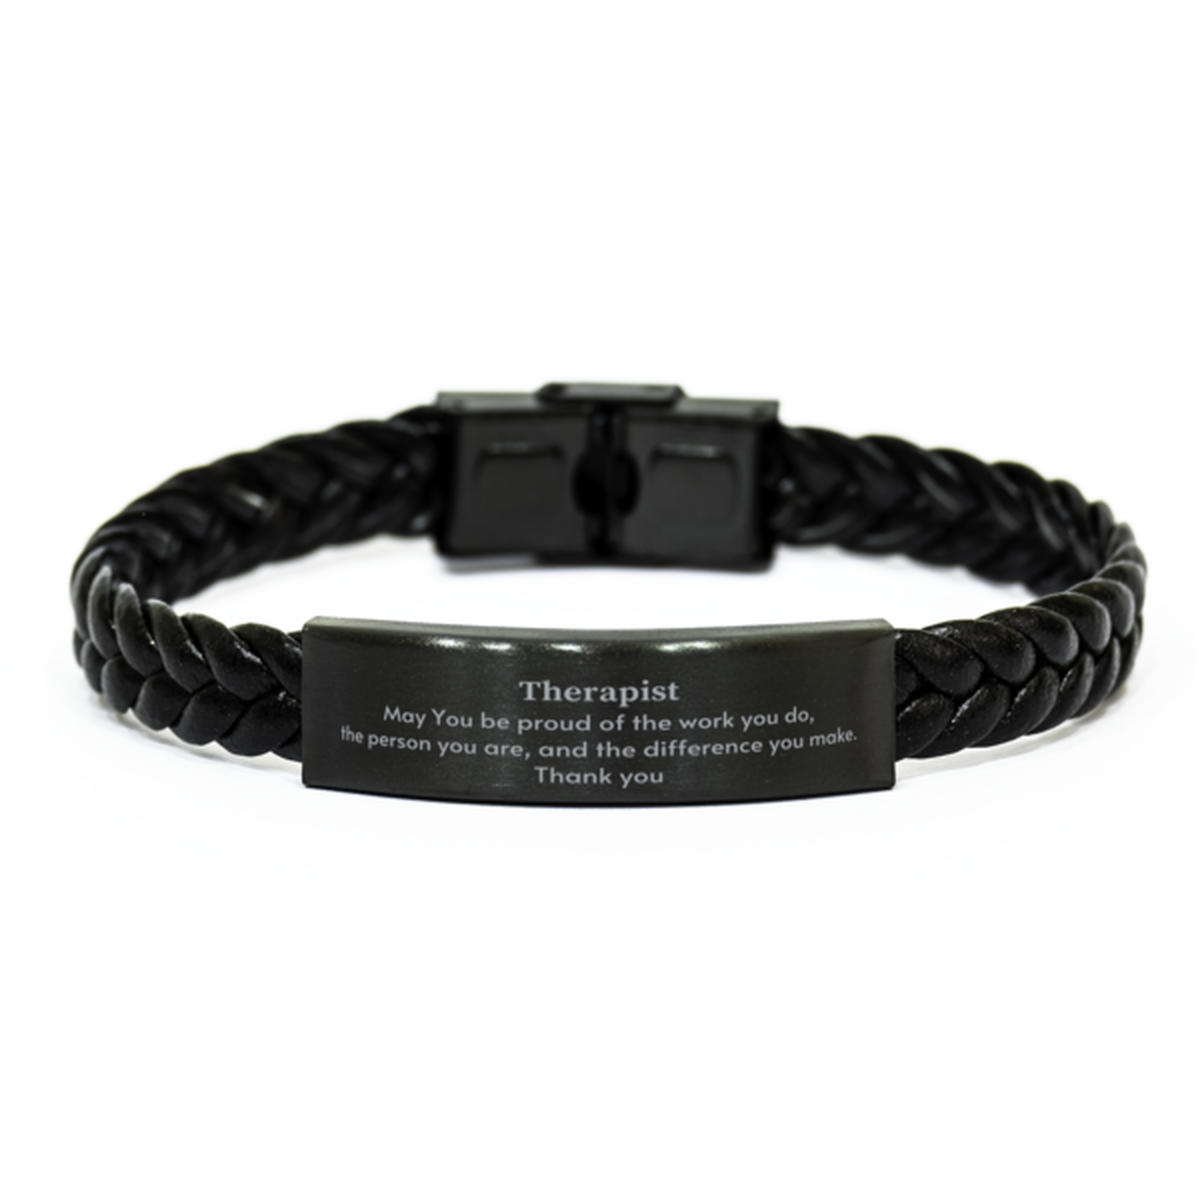 Heartwarming Braided Leather Bracelet Retirement Coworkers Gifts for Therapist, Therapist May You be proud of the work you do, the person you are Gifts for Boss Men Women Friends